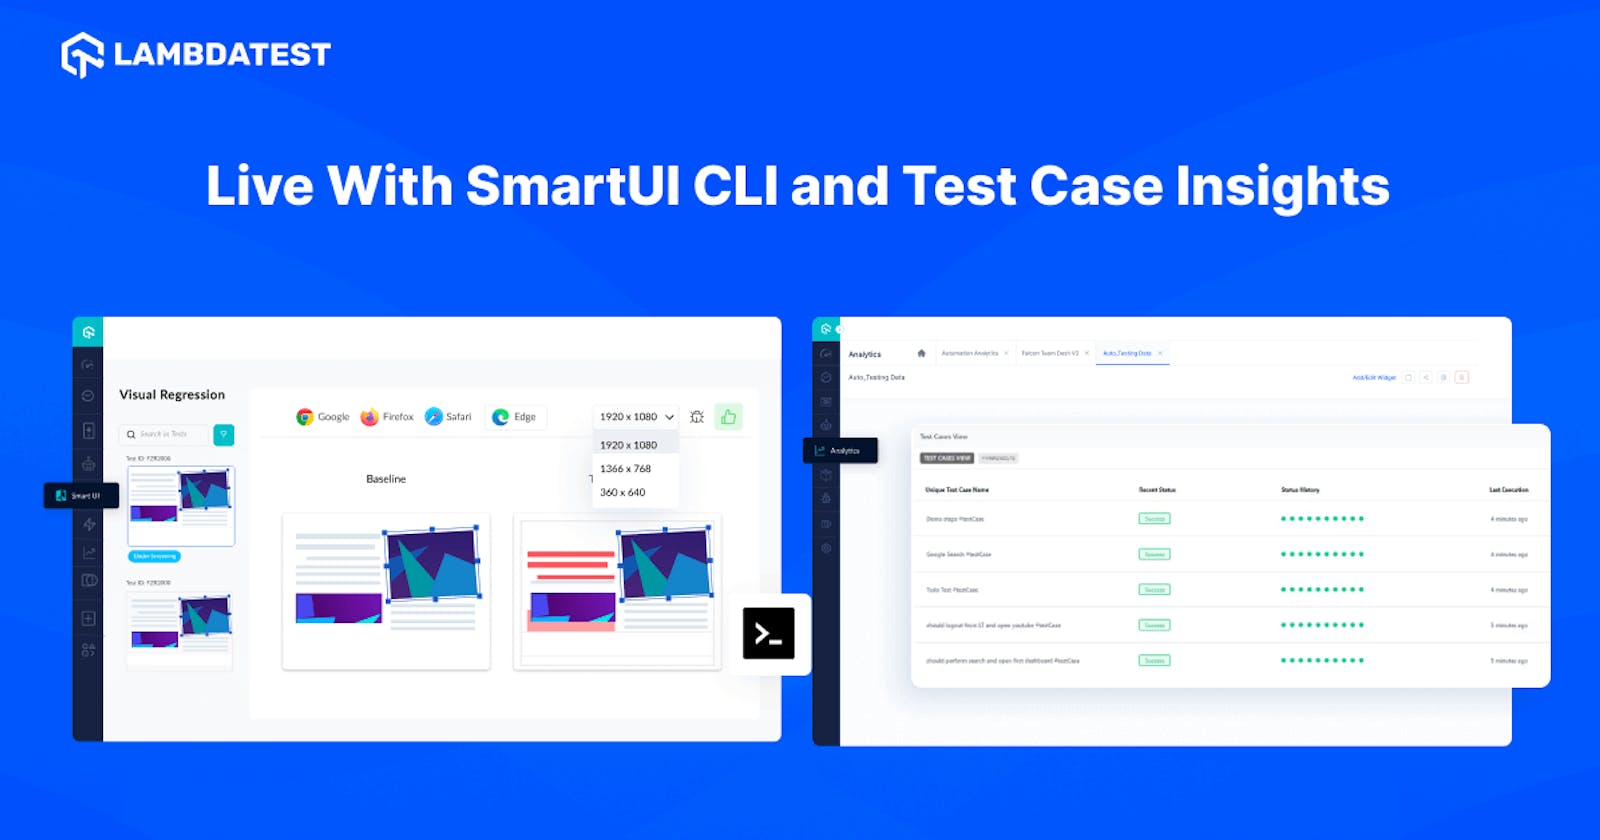 Now Live With SmartUI CLI and Test Case Insights Module